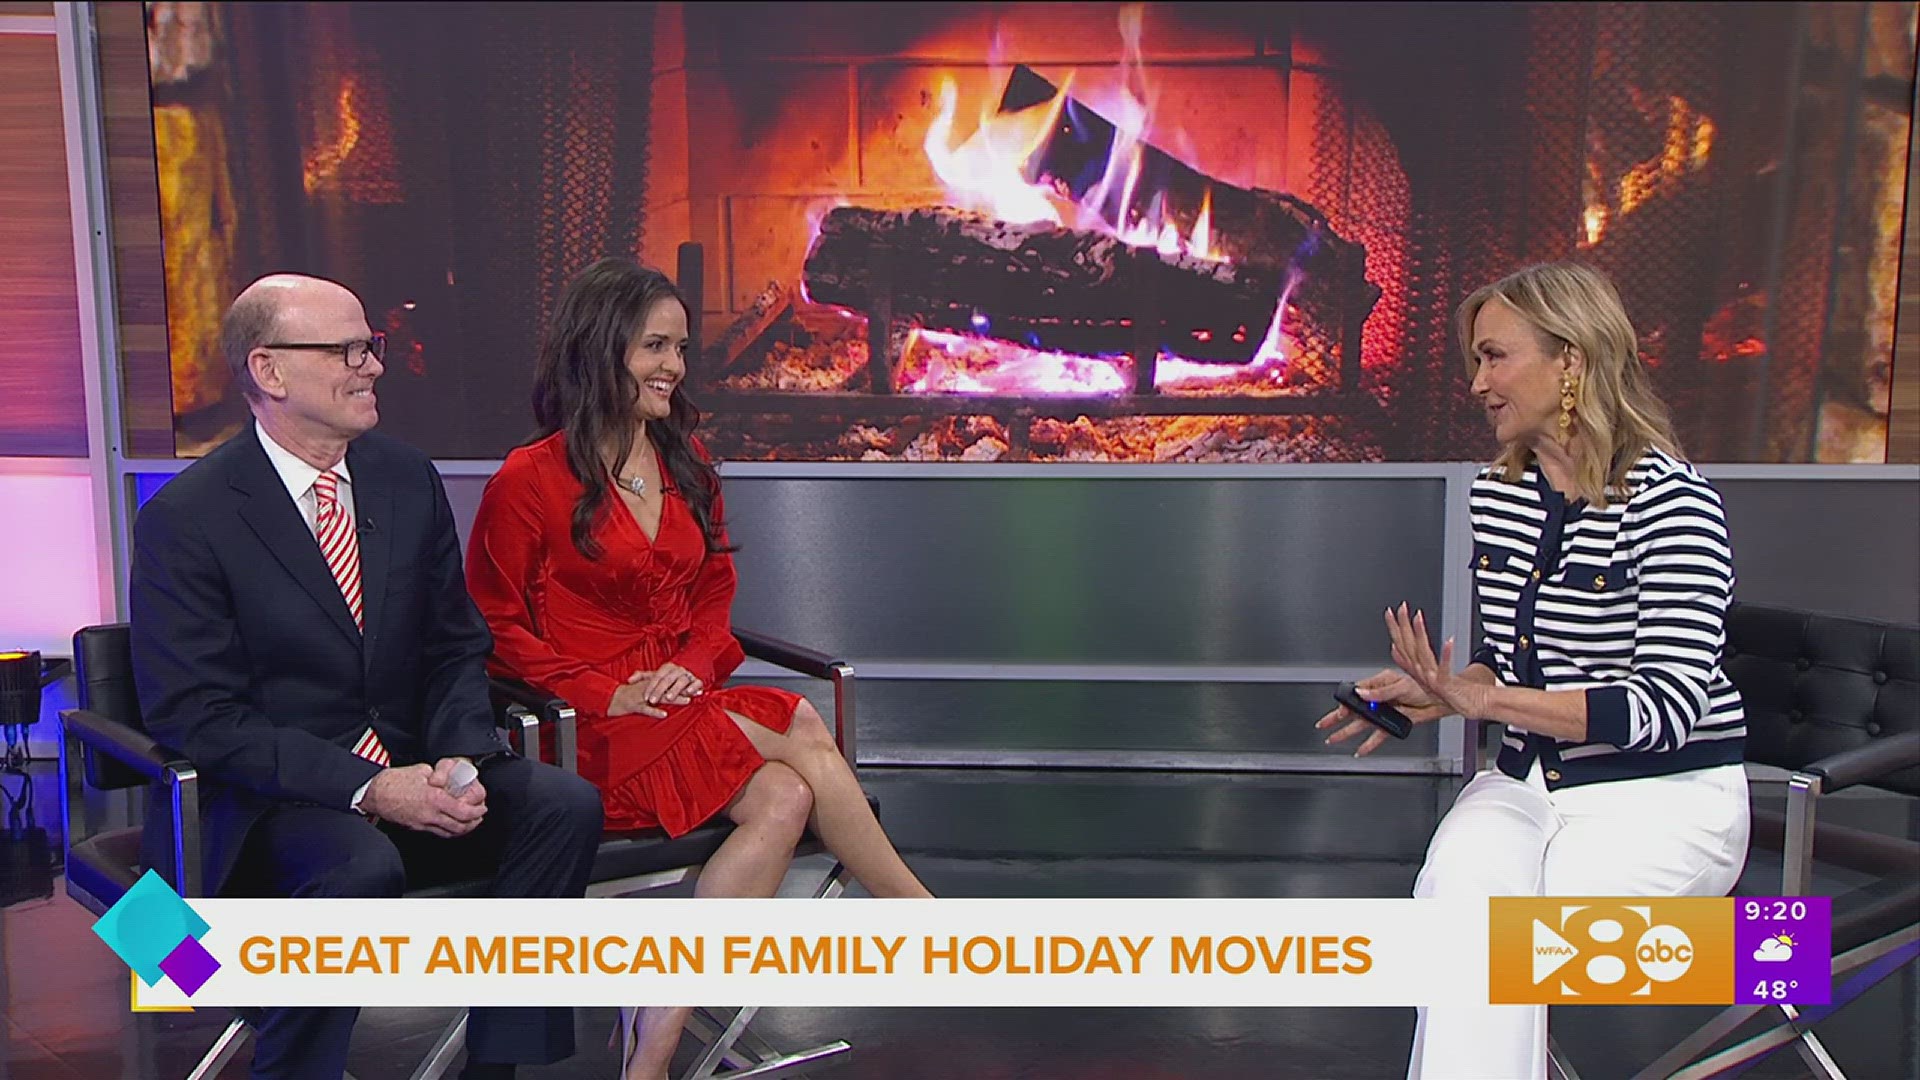 Actress Danica McKellar and Great American Family CEO Bill Abbott talk about the line-up of holiday movies including "A Royal Date for Christmas".